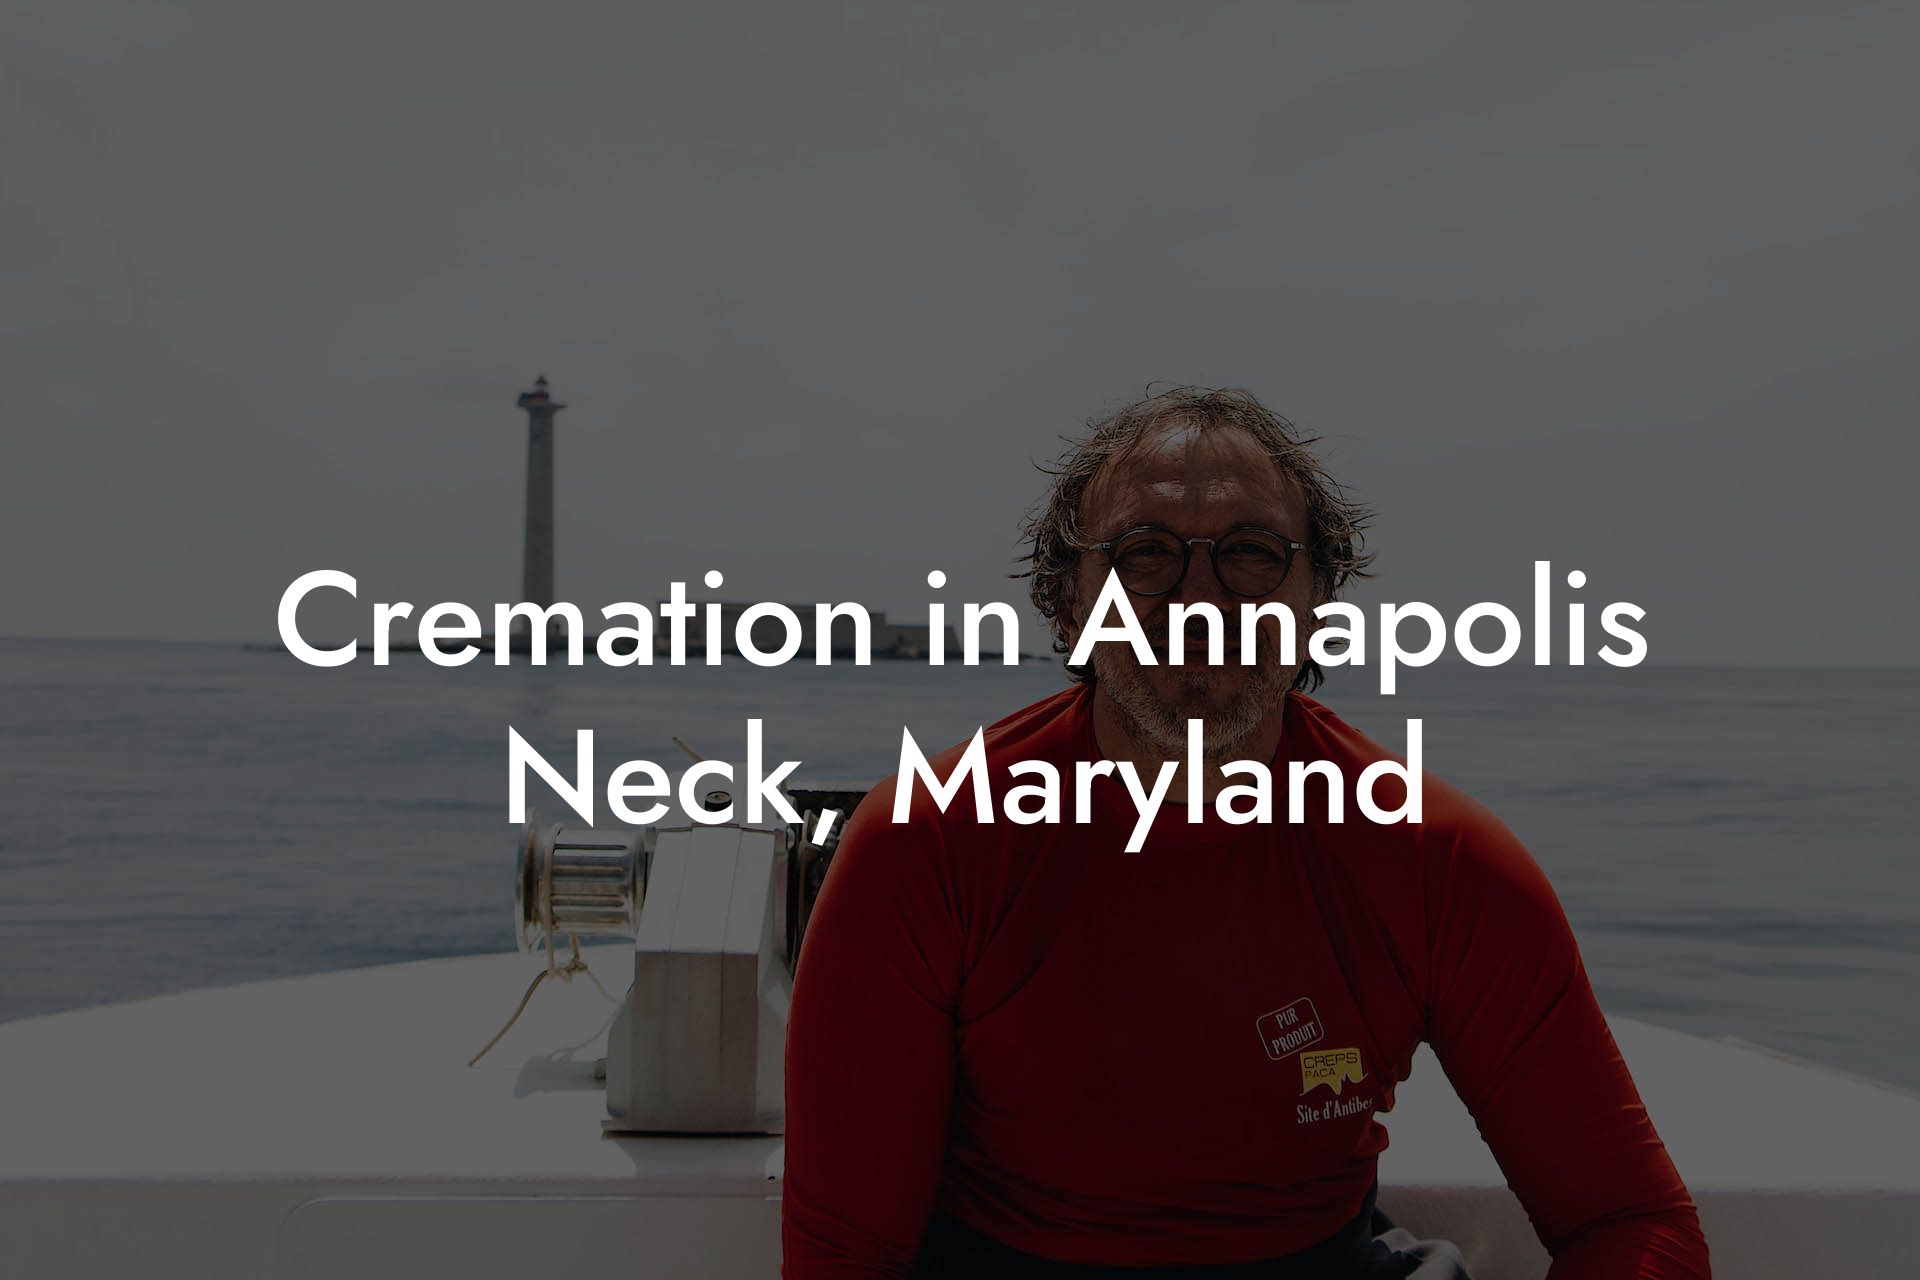 Cremation in Annapolis Neck, Maryland